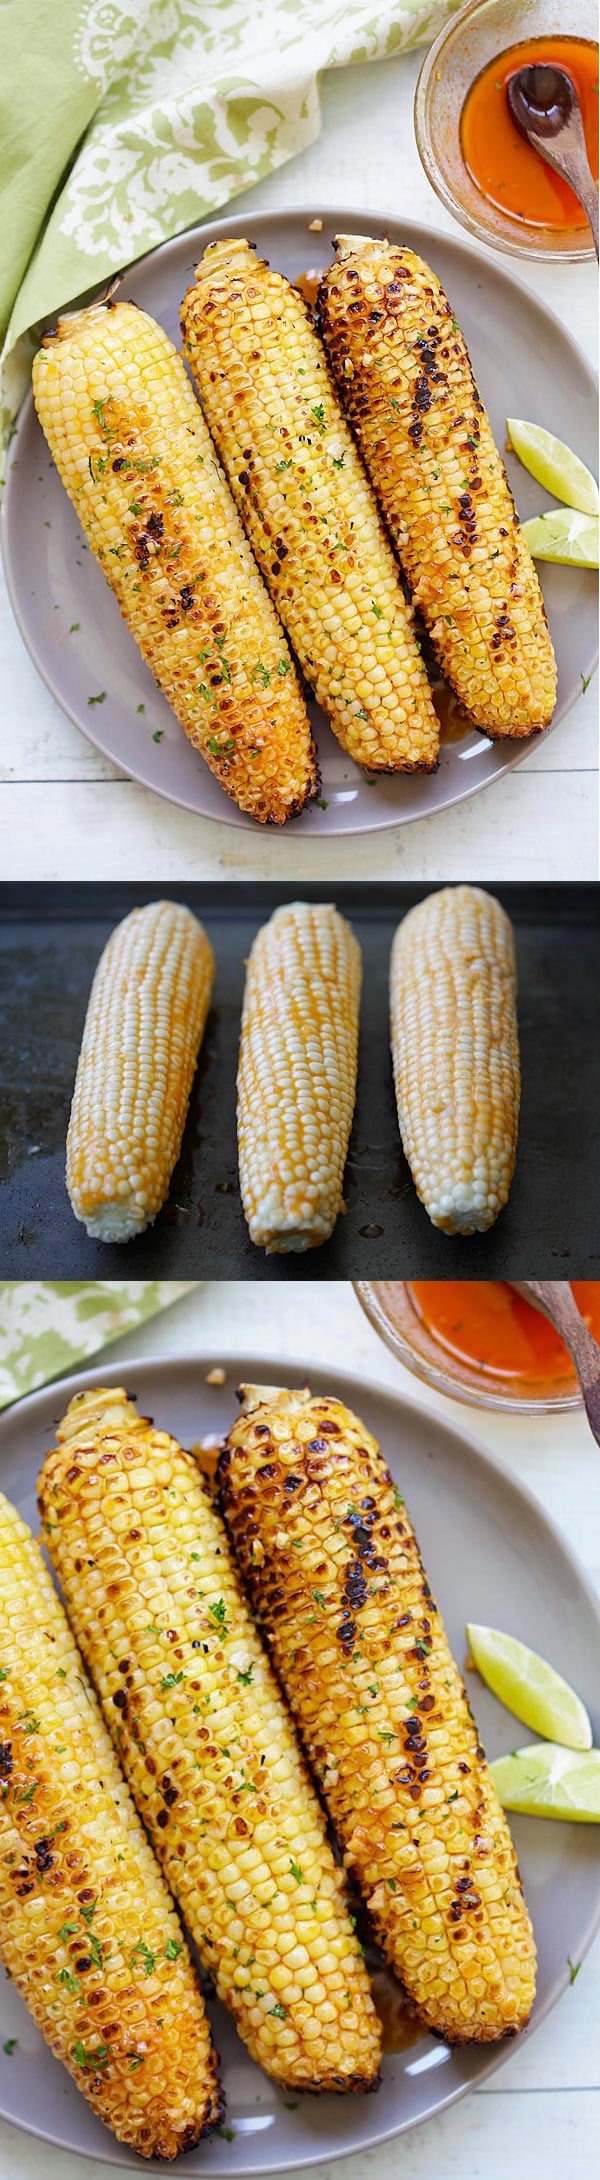 Honey Sriracha Butter Grilled Corn - buttery, sweet and slightly spicy grilled corns with honey sriracha butter. So easy and so good! | rasamalaysia.com